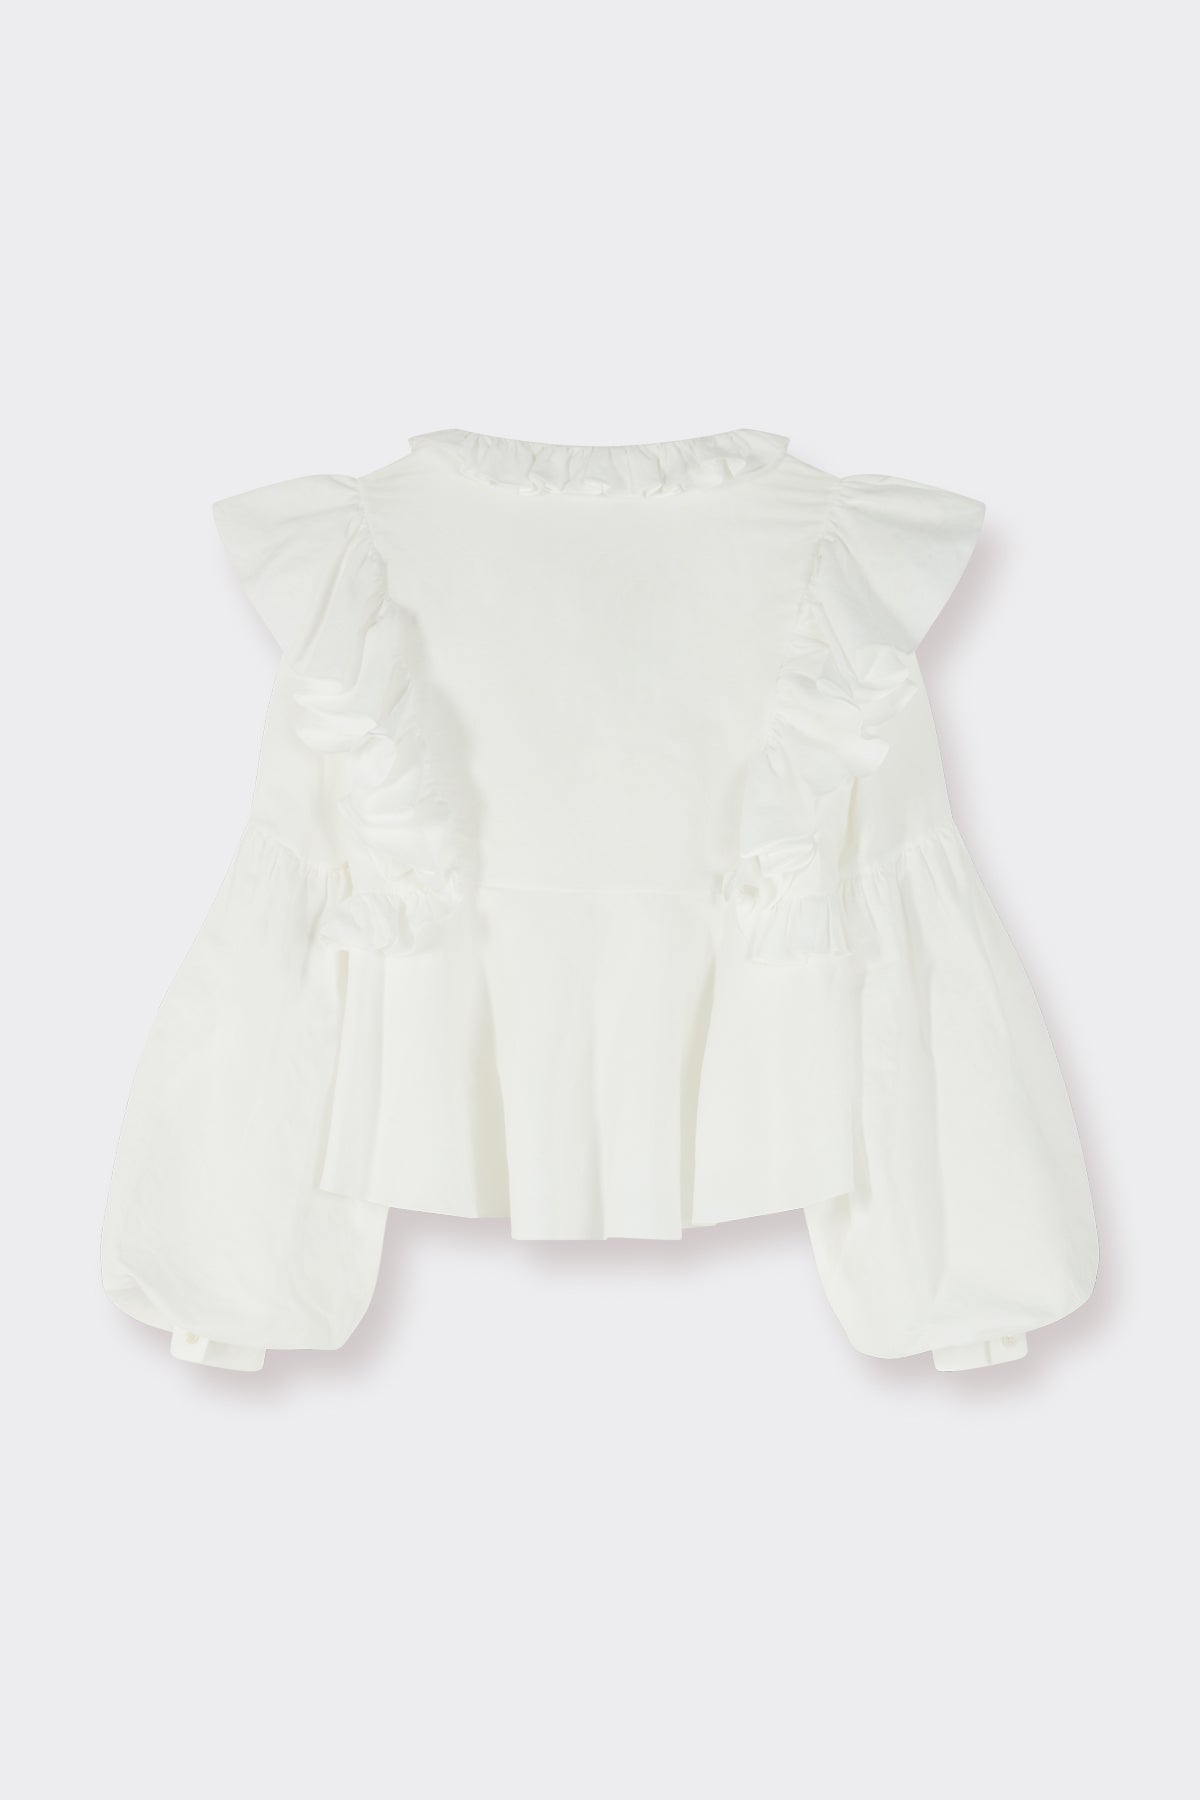 Channa Blouse in Soft White | Noon By Noor